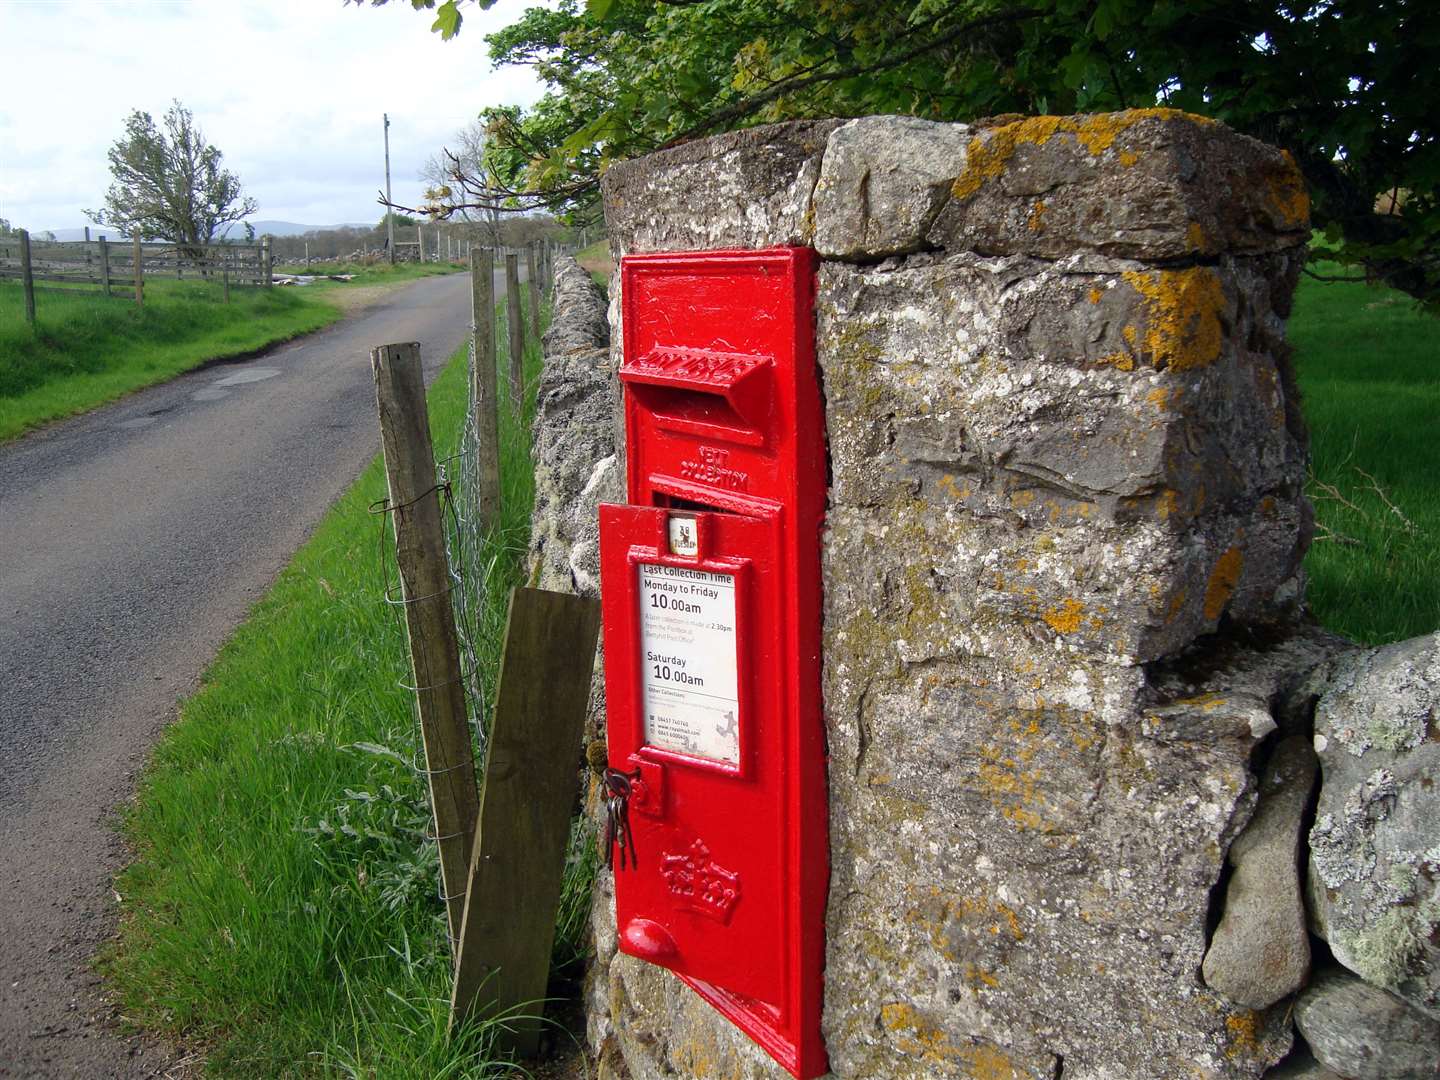 The wall box at Langdale, Strathnaver, was built in 1956, and would have been one of the first with the new Scottish cypher.